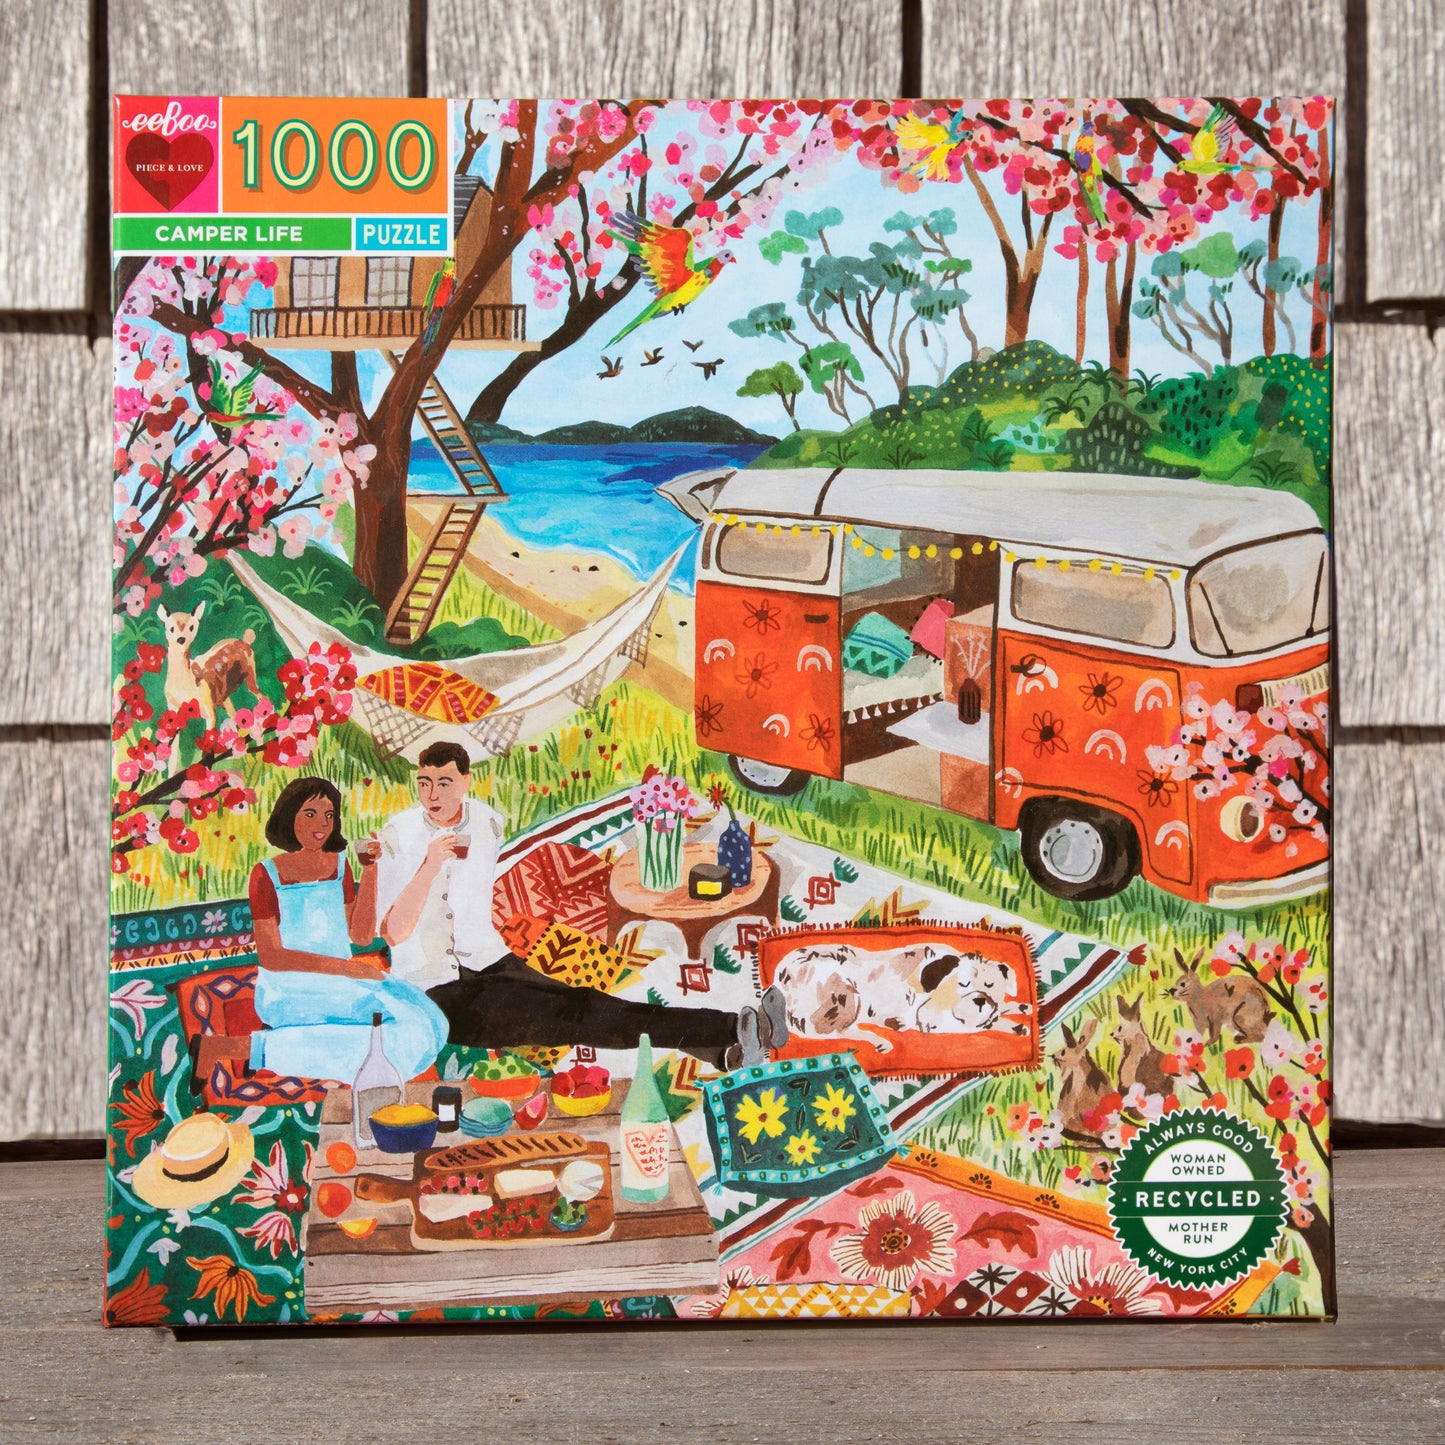 Camper Life 1000 Piece Jigsaw Puzzle Travel Nomad | eeBoo Piece & Love | Gifts for Van Life Travelers